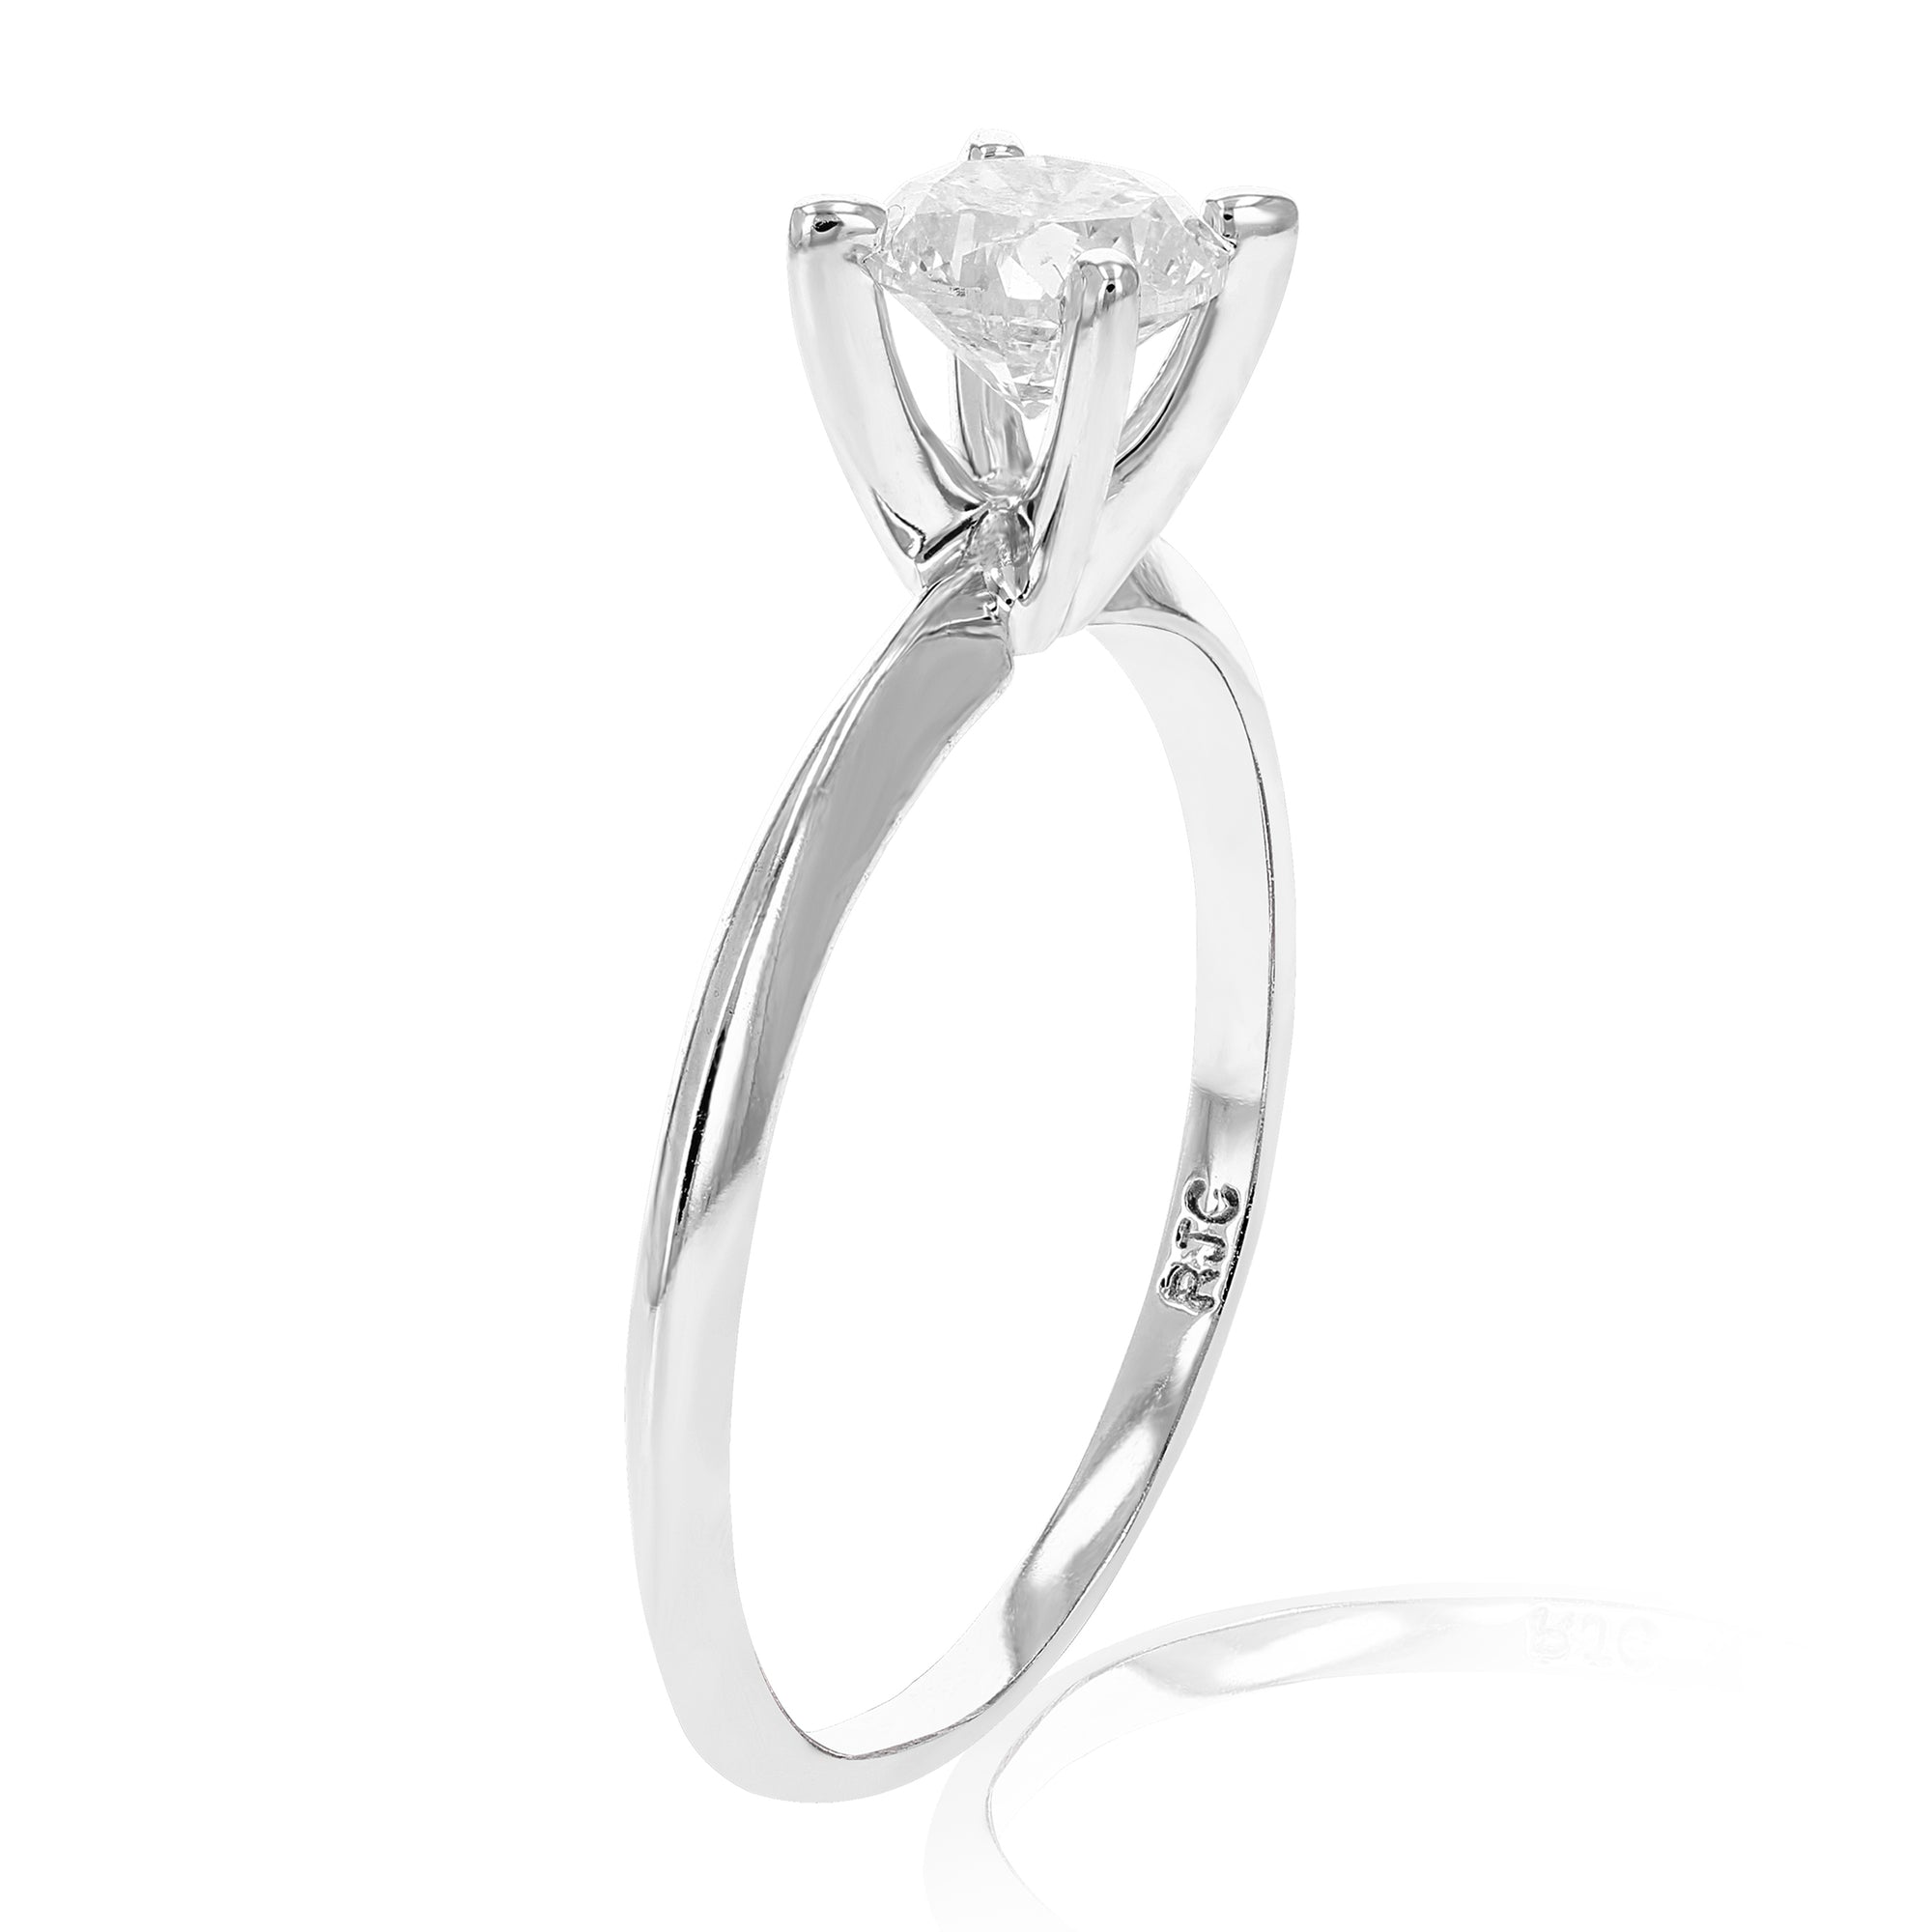 0.70 cttw Round Diamond Solitaire Engagement Ring 14K White Gold Bridal Size 7